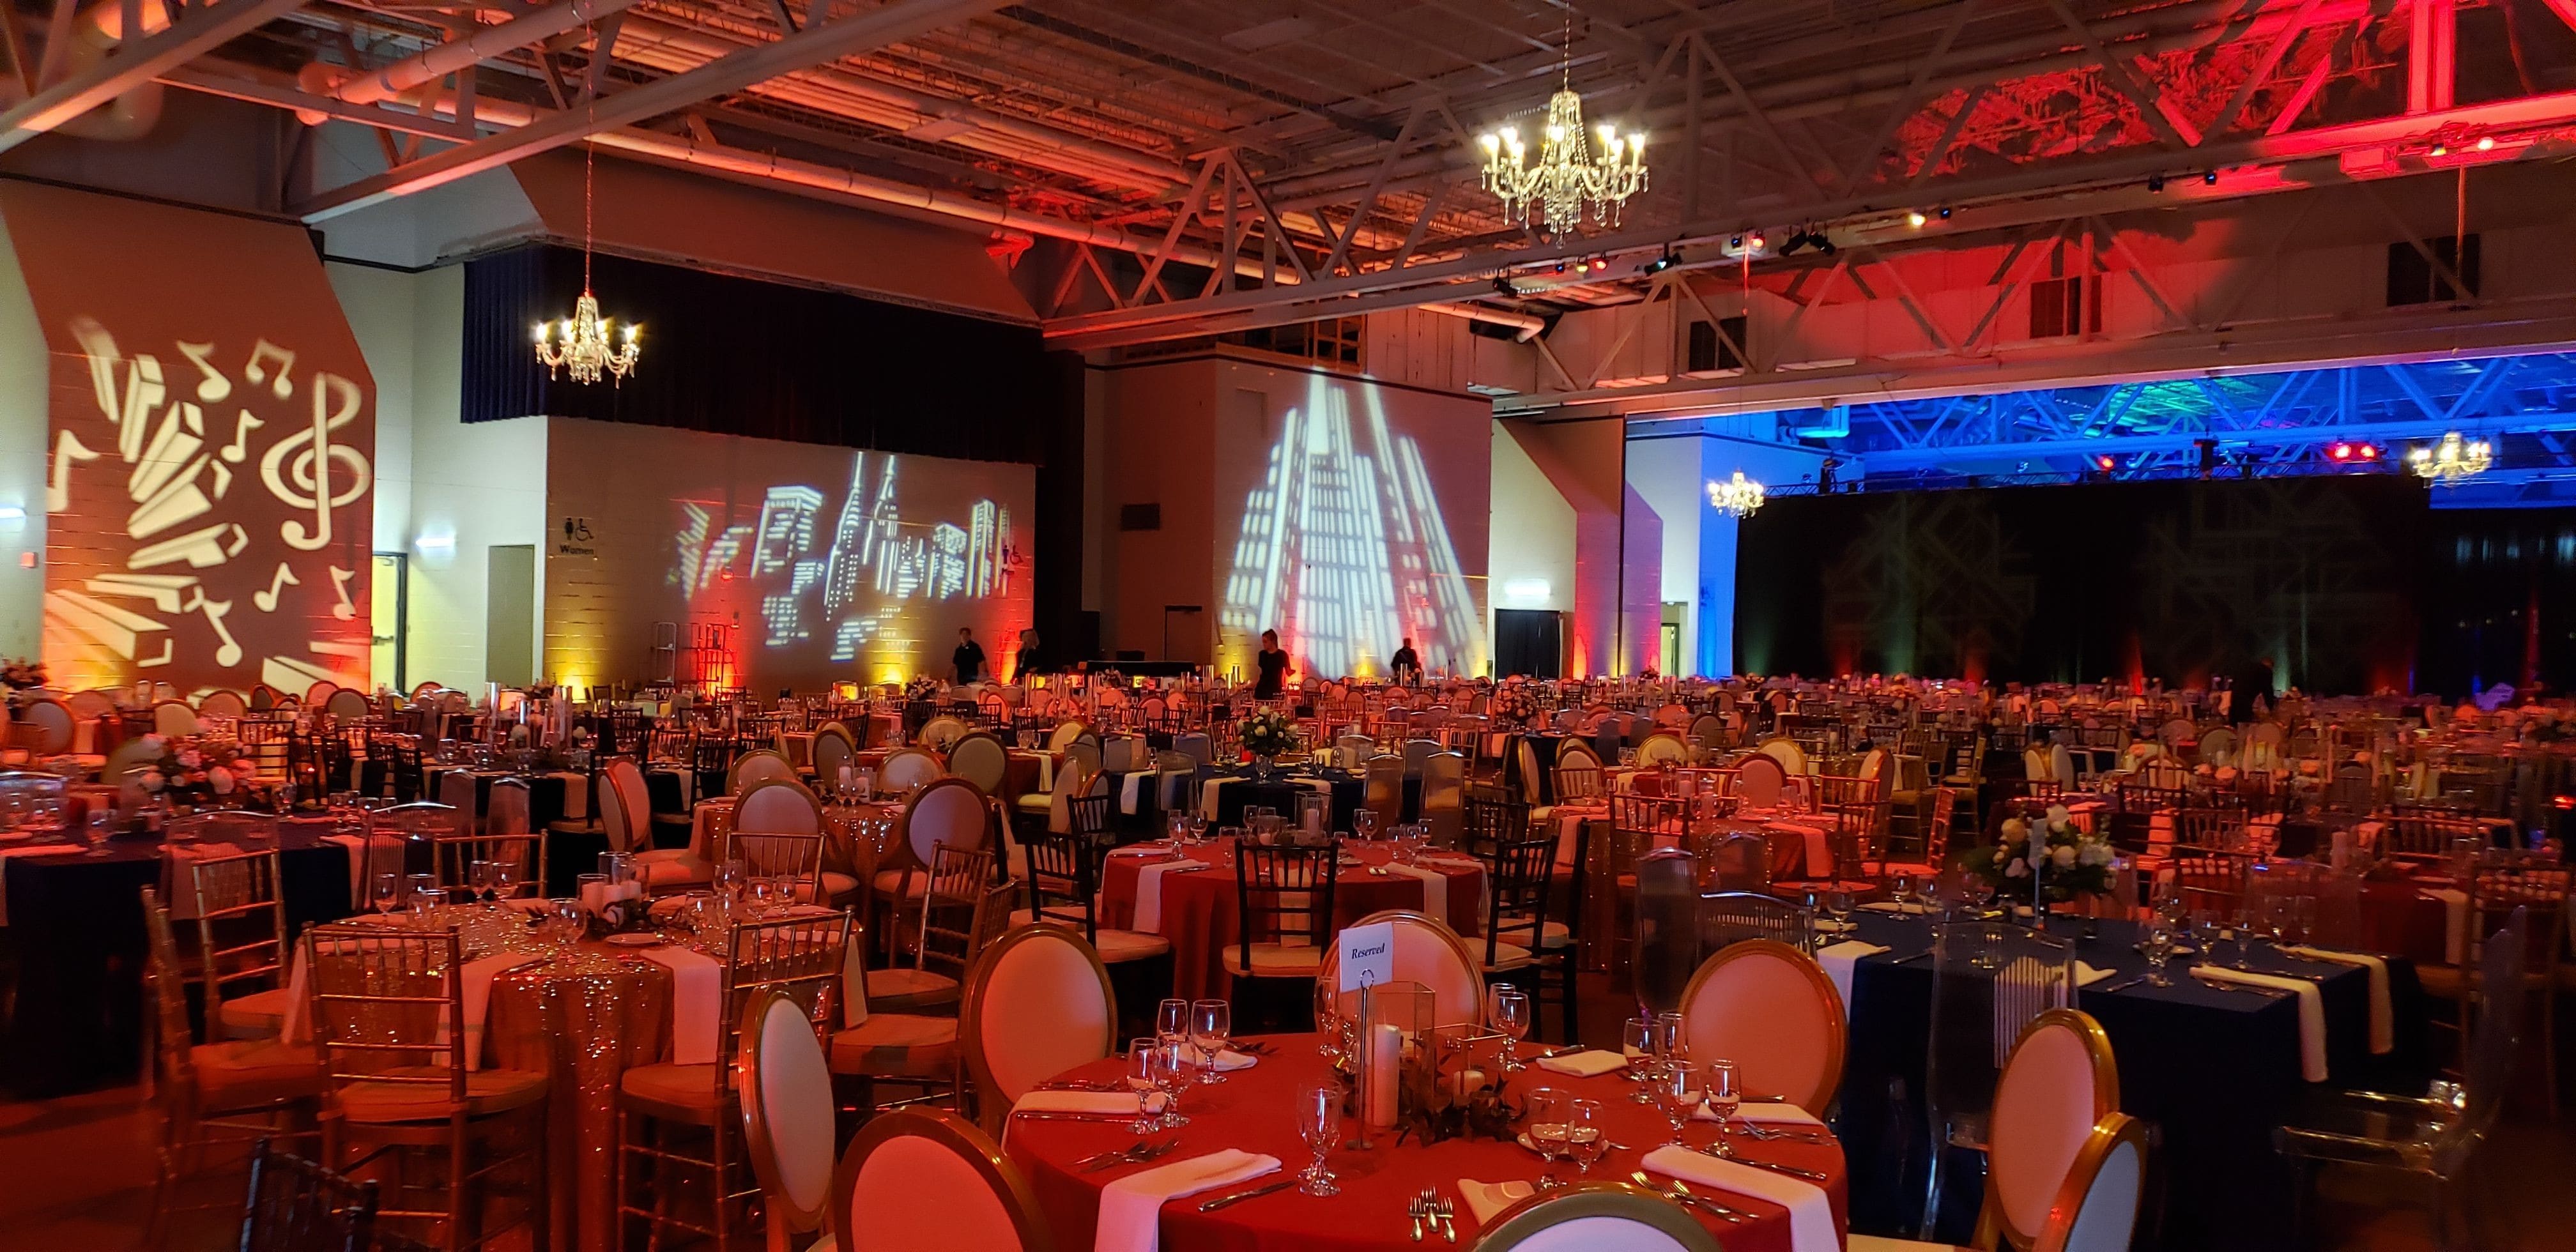 Event Lighting in pioneer Hall by Duluth Event Lighting. Red up lighting, gobos on the walls,chandeliers provided by Duluth Event Lighting.